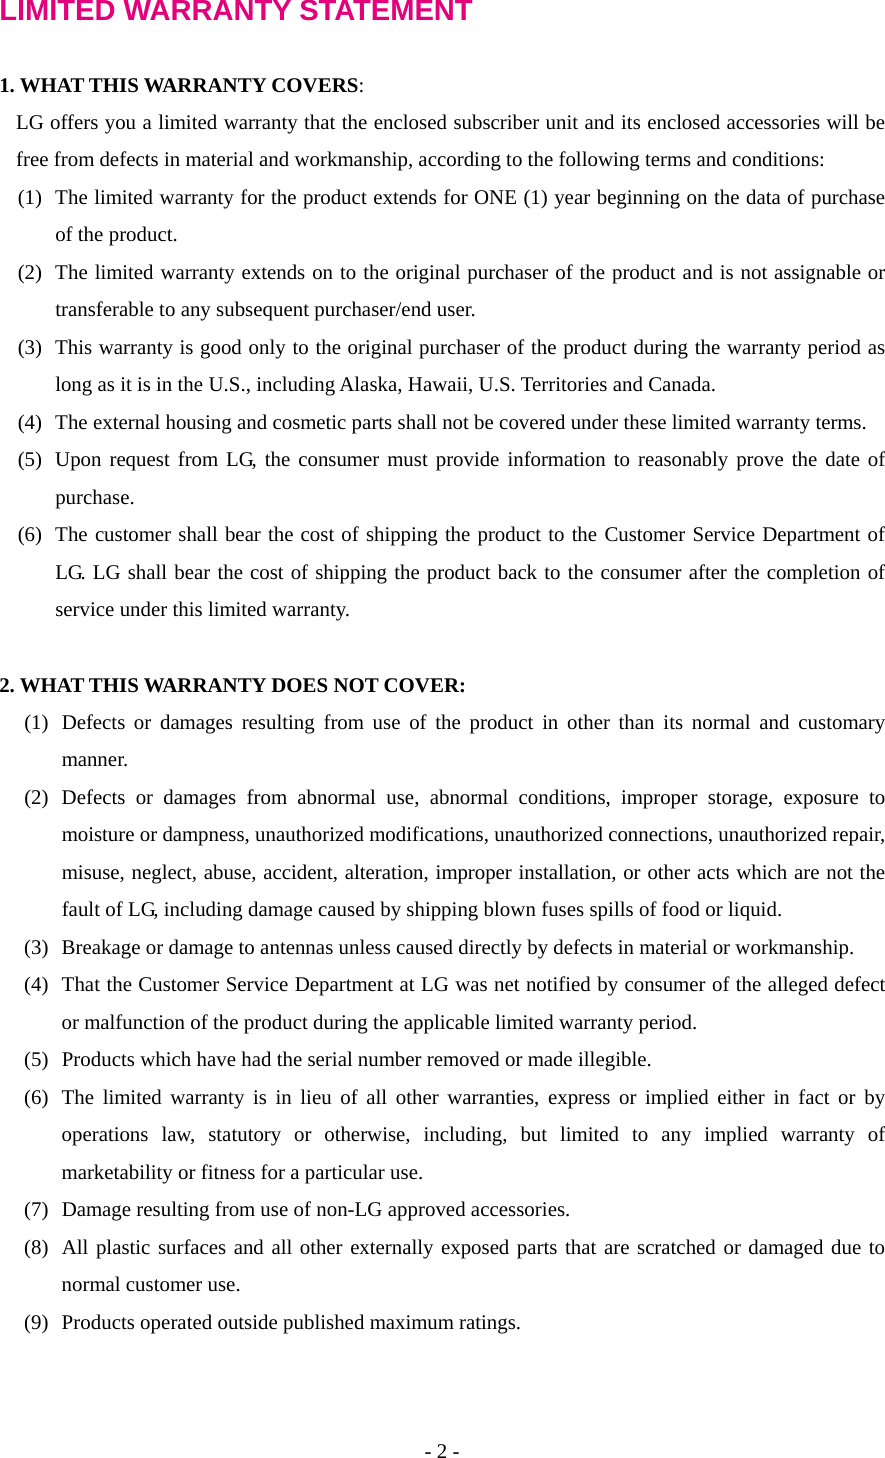 LIMITED WARRANTY STATEMENT  1. WHAT THIS WARRANTY COVERS: LG offers you a limited warranty that the enclosed subscriber unit and its enclosed accessories will be free from defects in material and workmanship, according to the following terms and conditions: (1)  The limited warranty for the product extends for ONE (1) year beginning on the data of purchase of the product. (2)  The limited warranty extends on to the original purchaser of the product and is not assignable or transferable to any subsequent purchaser/end user. (3)  This warranty is good only to the original purchaser of the product during the warranty period as long as it is in the U.S., including Alaska, Hawaii, U.S. Territories and Canada. (4)  The external housing and cosmetic parts shall not be covered under these limited warranty terms. (5)  Upon request from LG, the consumer must provide information to reasonably prove the date of purchase. (6)  The customer shall bear the cost of shipping the product to the Customer Service Department of LG. LG shall bear the cost of shipping the product back to the consumer after the completion of service under this limited warranty.  2. WHAT THIS WARRANTY DOES NOT COVER: (1)  Defects or damages resulting from use of the product in other than its normal and customary manner. (2) Defects or damages from abnormal use, abnormal conditions, improper storage, exposure to moisture or dampness, unauthorized modifications, unauthorized connections, unauthorized repair, misuse, neglect, abuse, accident, alteration, improper installation, or other acts which are not the fault of LG, including damage caused by shipping blown fuses spills of food or liquid. (3)  Breakage or damage to antennas unless caused directly by defects in material or workmanship. (4)  That the Customer Service Department at LG was net notified by consumer of the alleged defect or malfunction of the product during the applicable limited warranty period. (5)  Products which have had the serial number removed or made illegible. (6)  The limited warranty is in lieu of all other warranties, express or implied either in fact or by operations law, statutory or otherwise, including, but limited to any implied warranty of marketability or fitness for a particular use. (7)  Damage resulting from use of non-LG approved accessories. (8)  All plastic surfaces and all other externally exposed parts that are scratched or damaged due to normal customer use. (9)  Products operated outside published maximum ratings. - 2 - 